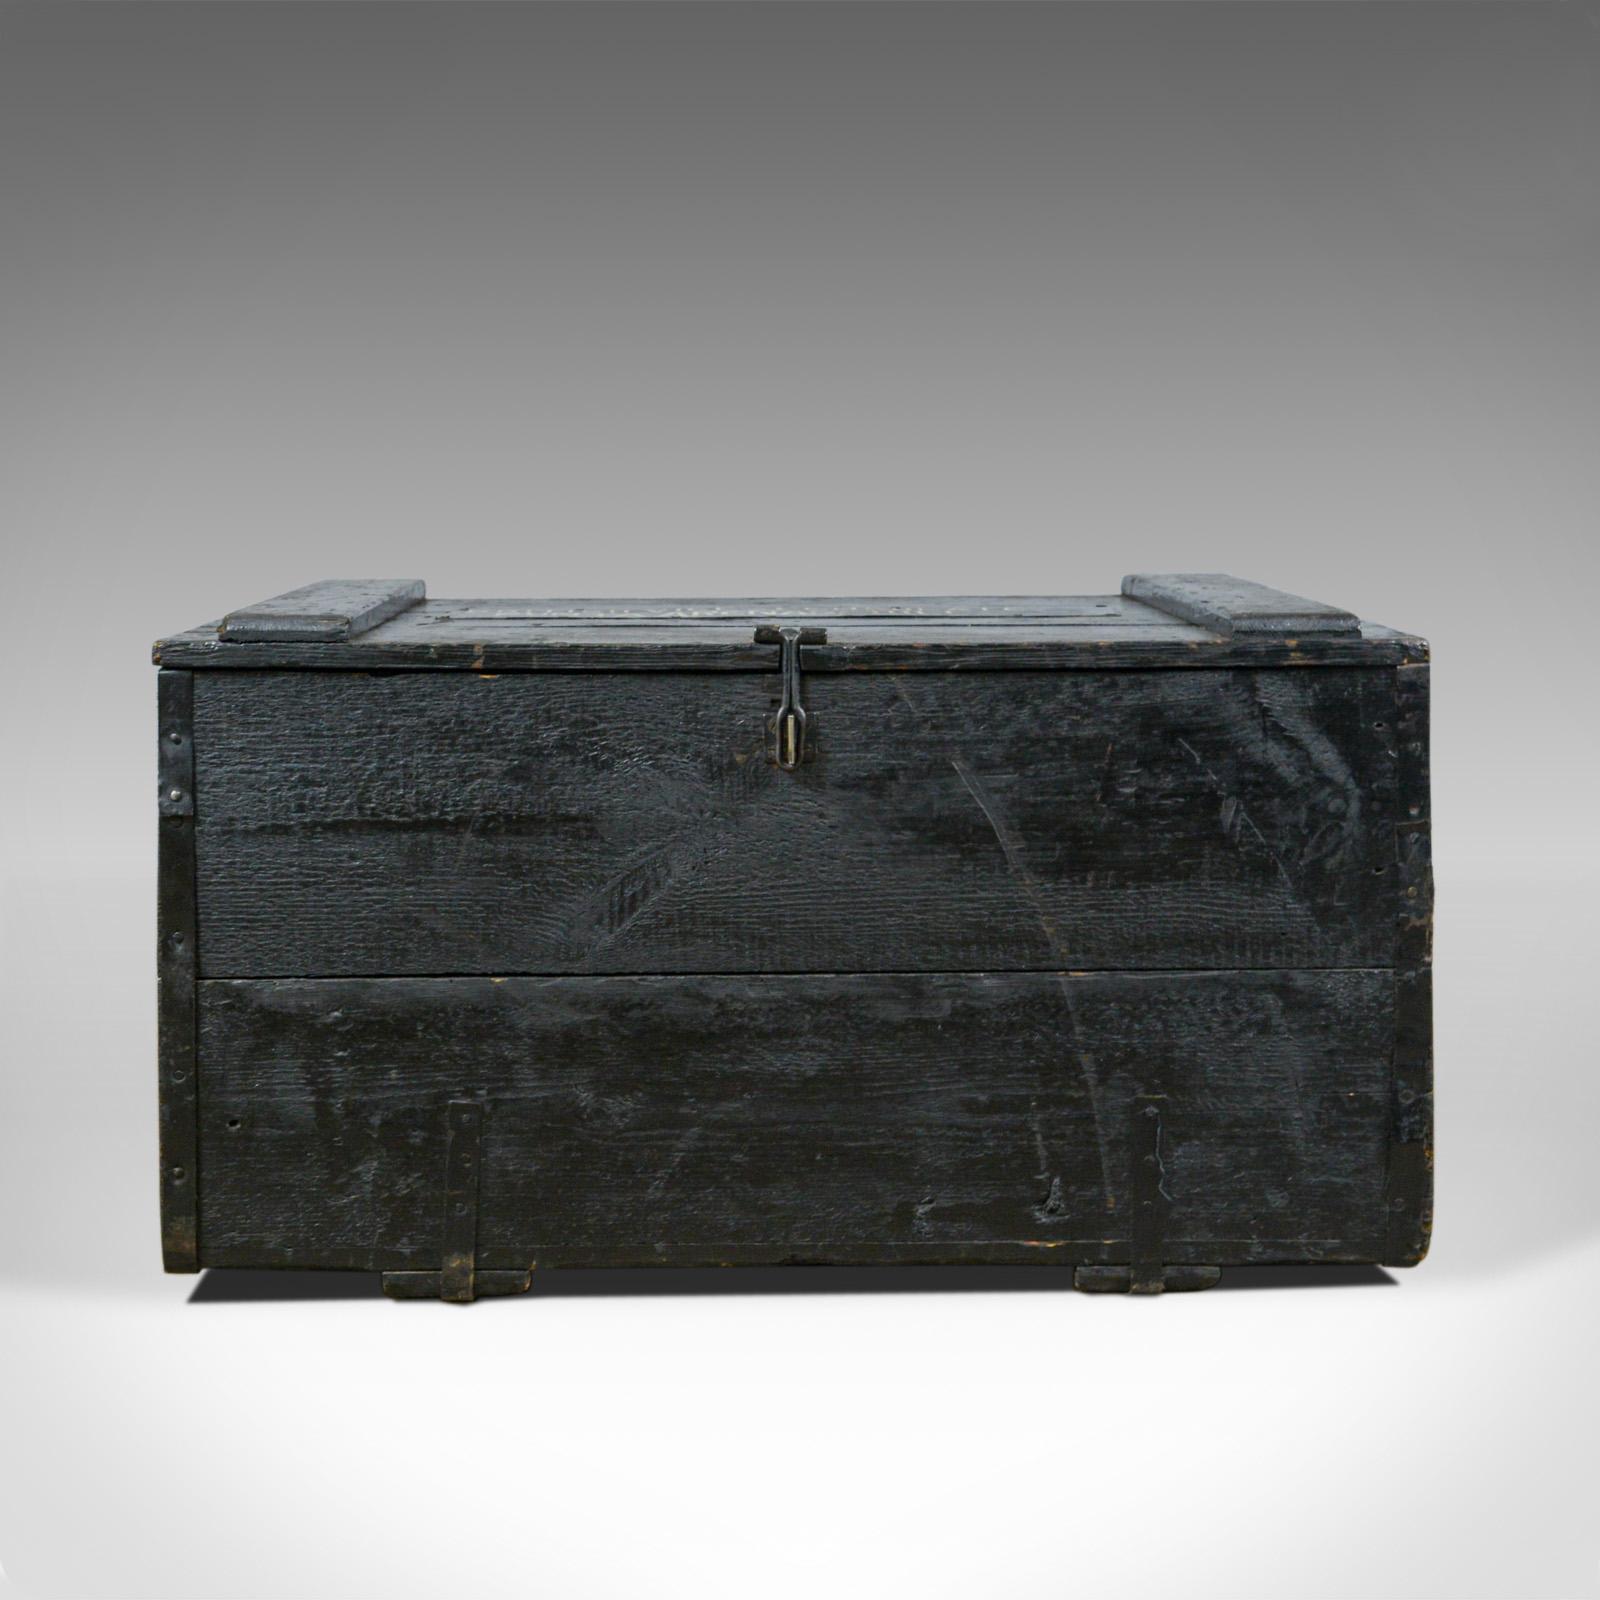 This is an antique steamer trunk once belonging to T.B. Wildman of the British Vice-Consulate, Punta Arenas, Chile. A ship's travel chest dating to circa 1919.

Of historical interest and original condition
Of attractive, rustic, planked